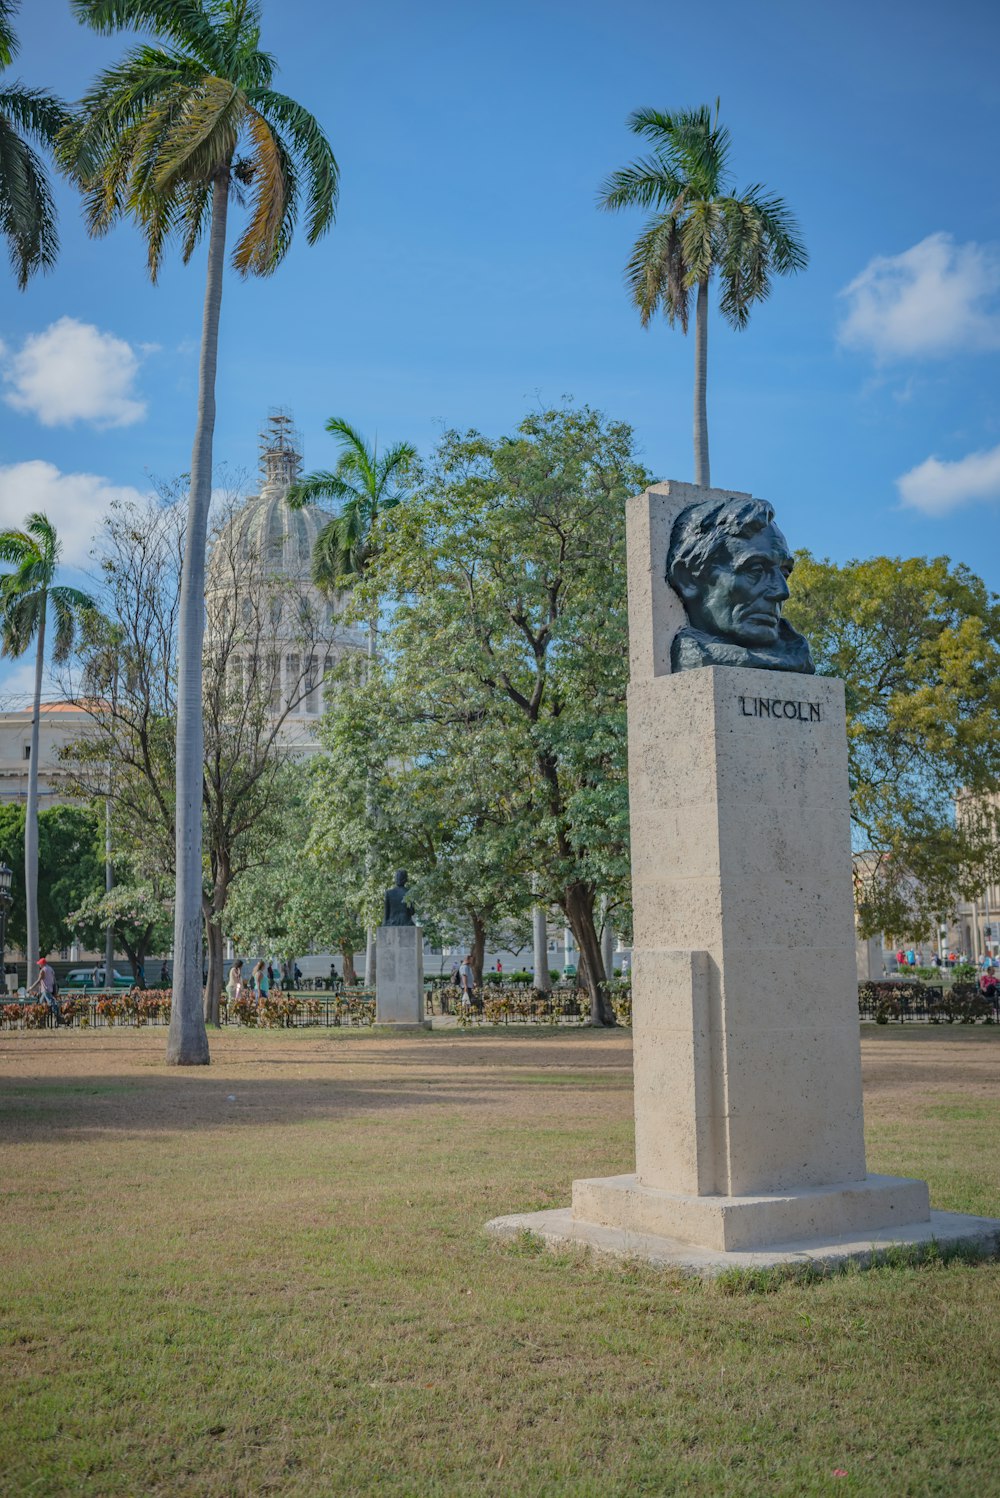 a monument in a park with palm trees in the background